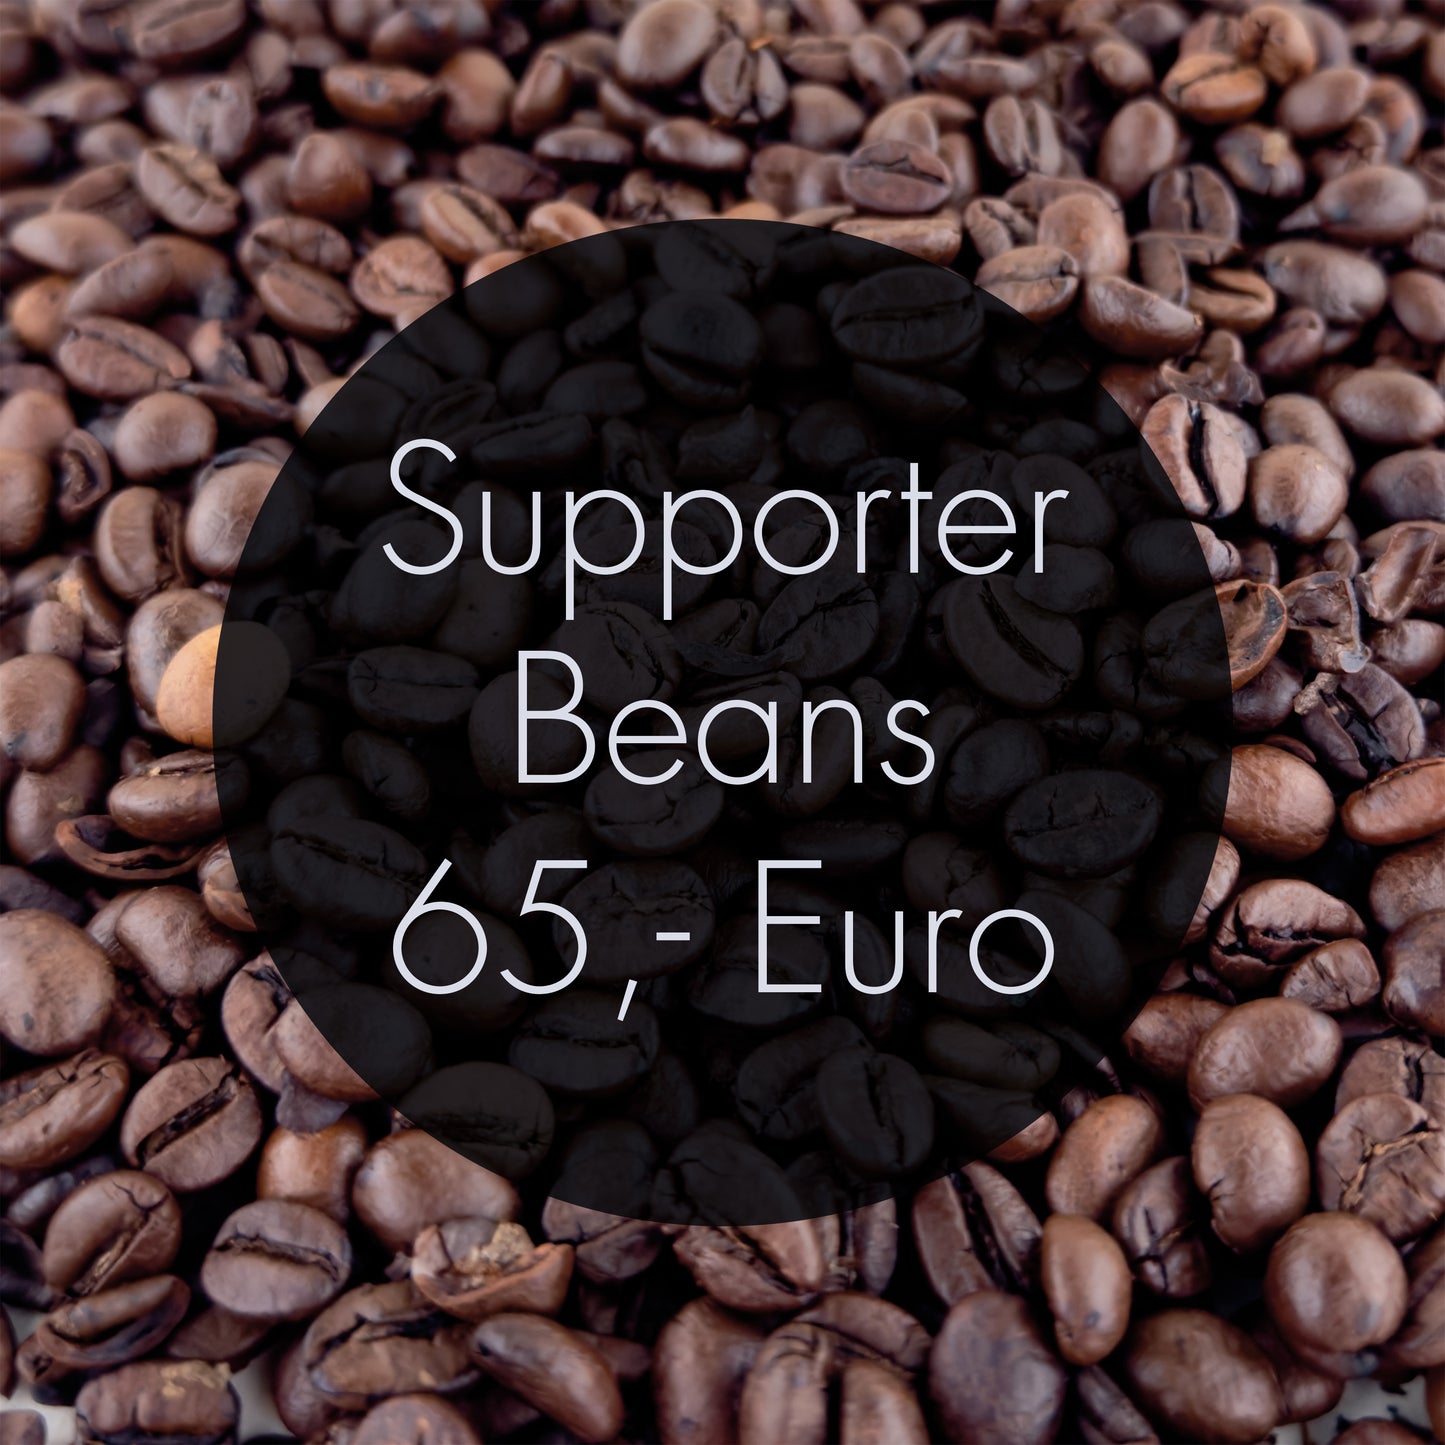 Supporter Beans 65,- Euro